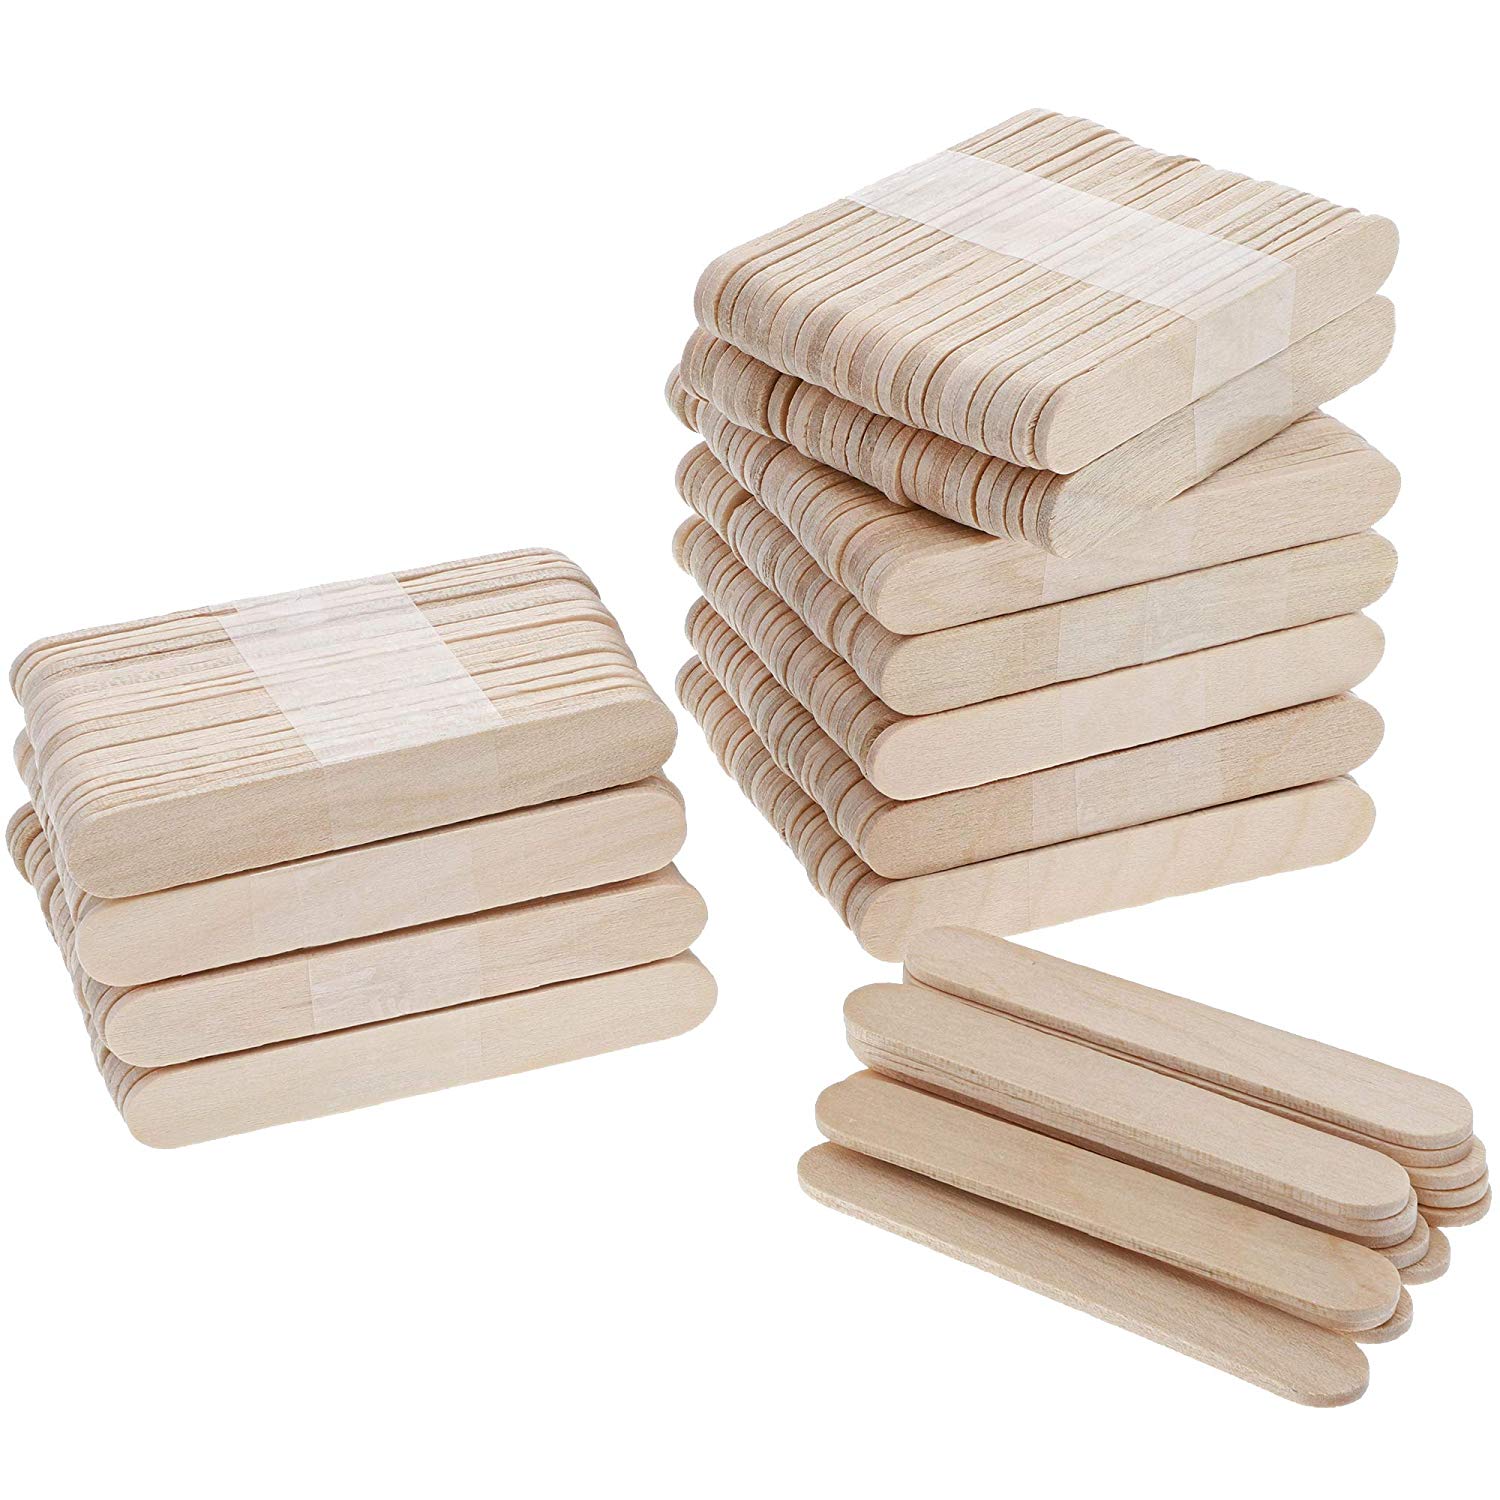 300 Pack Small Wooden Popsicle Sticks for Crafts, Bulk Small Wood